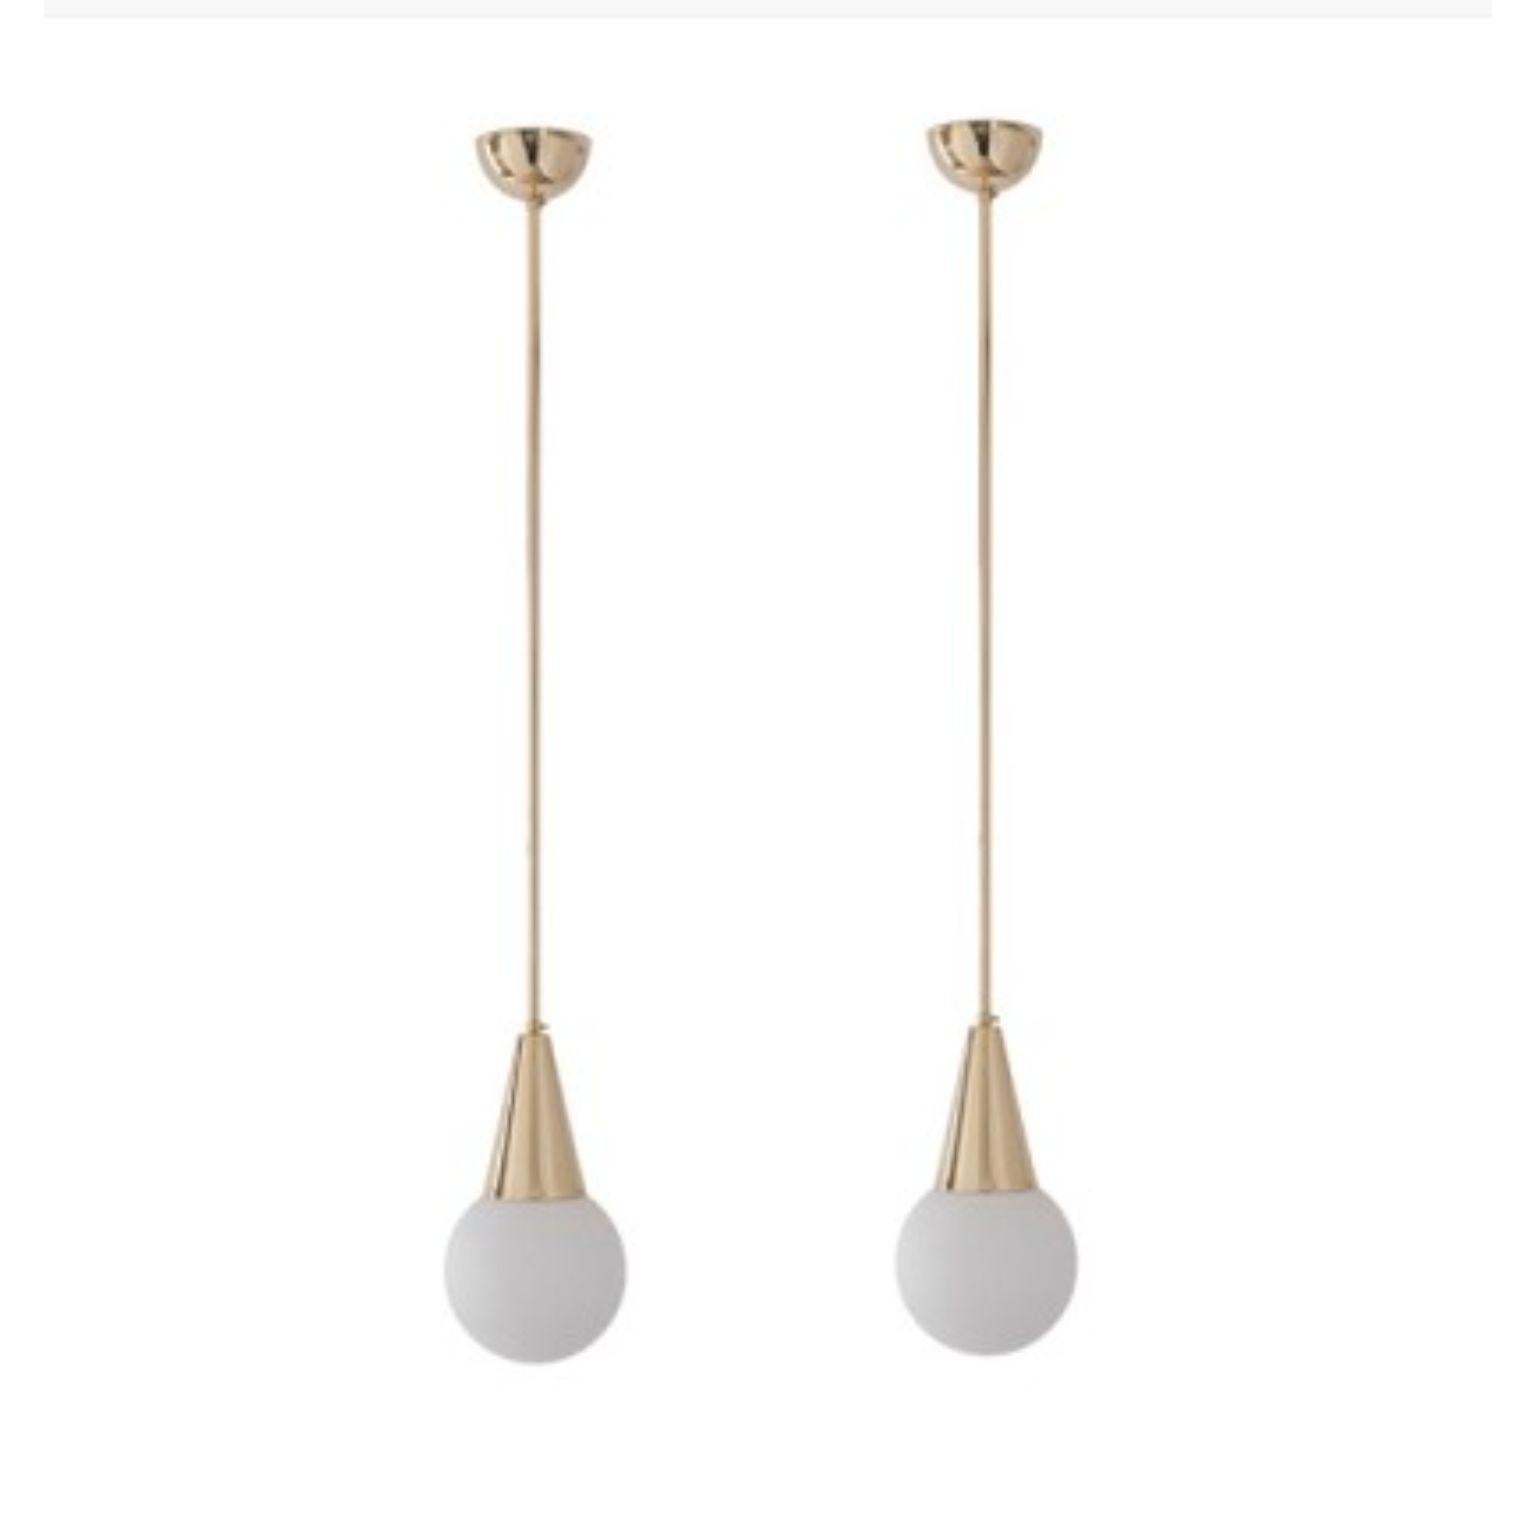 Set of 2 pendants 05 by Magic Circus Editions
Dimensions: D 25 x W 25 x H 150 cm, also available in H 110, 130, 150, 175, 190 cm
Materials: Brass, mouth blown glass

All our lamps can be wired according to each country. If sold to the USA it